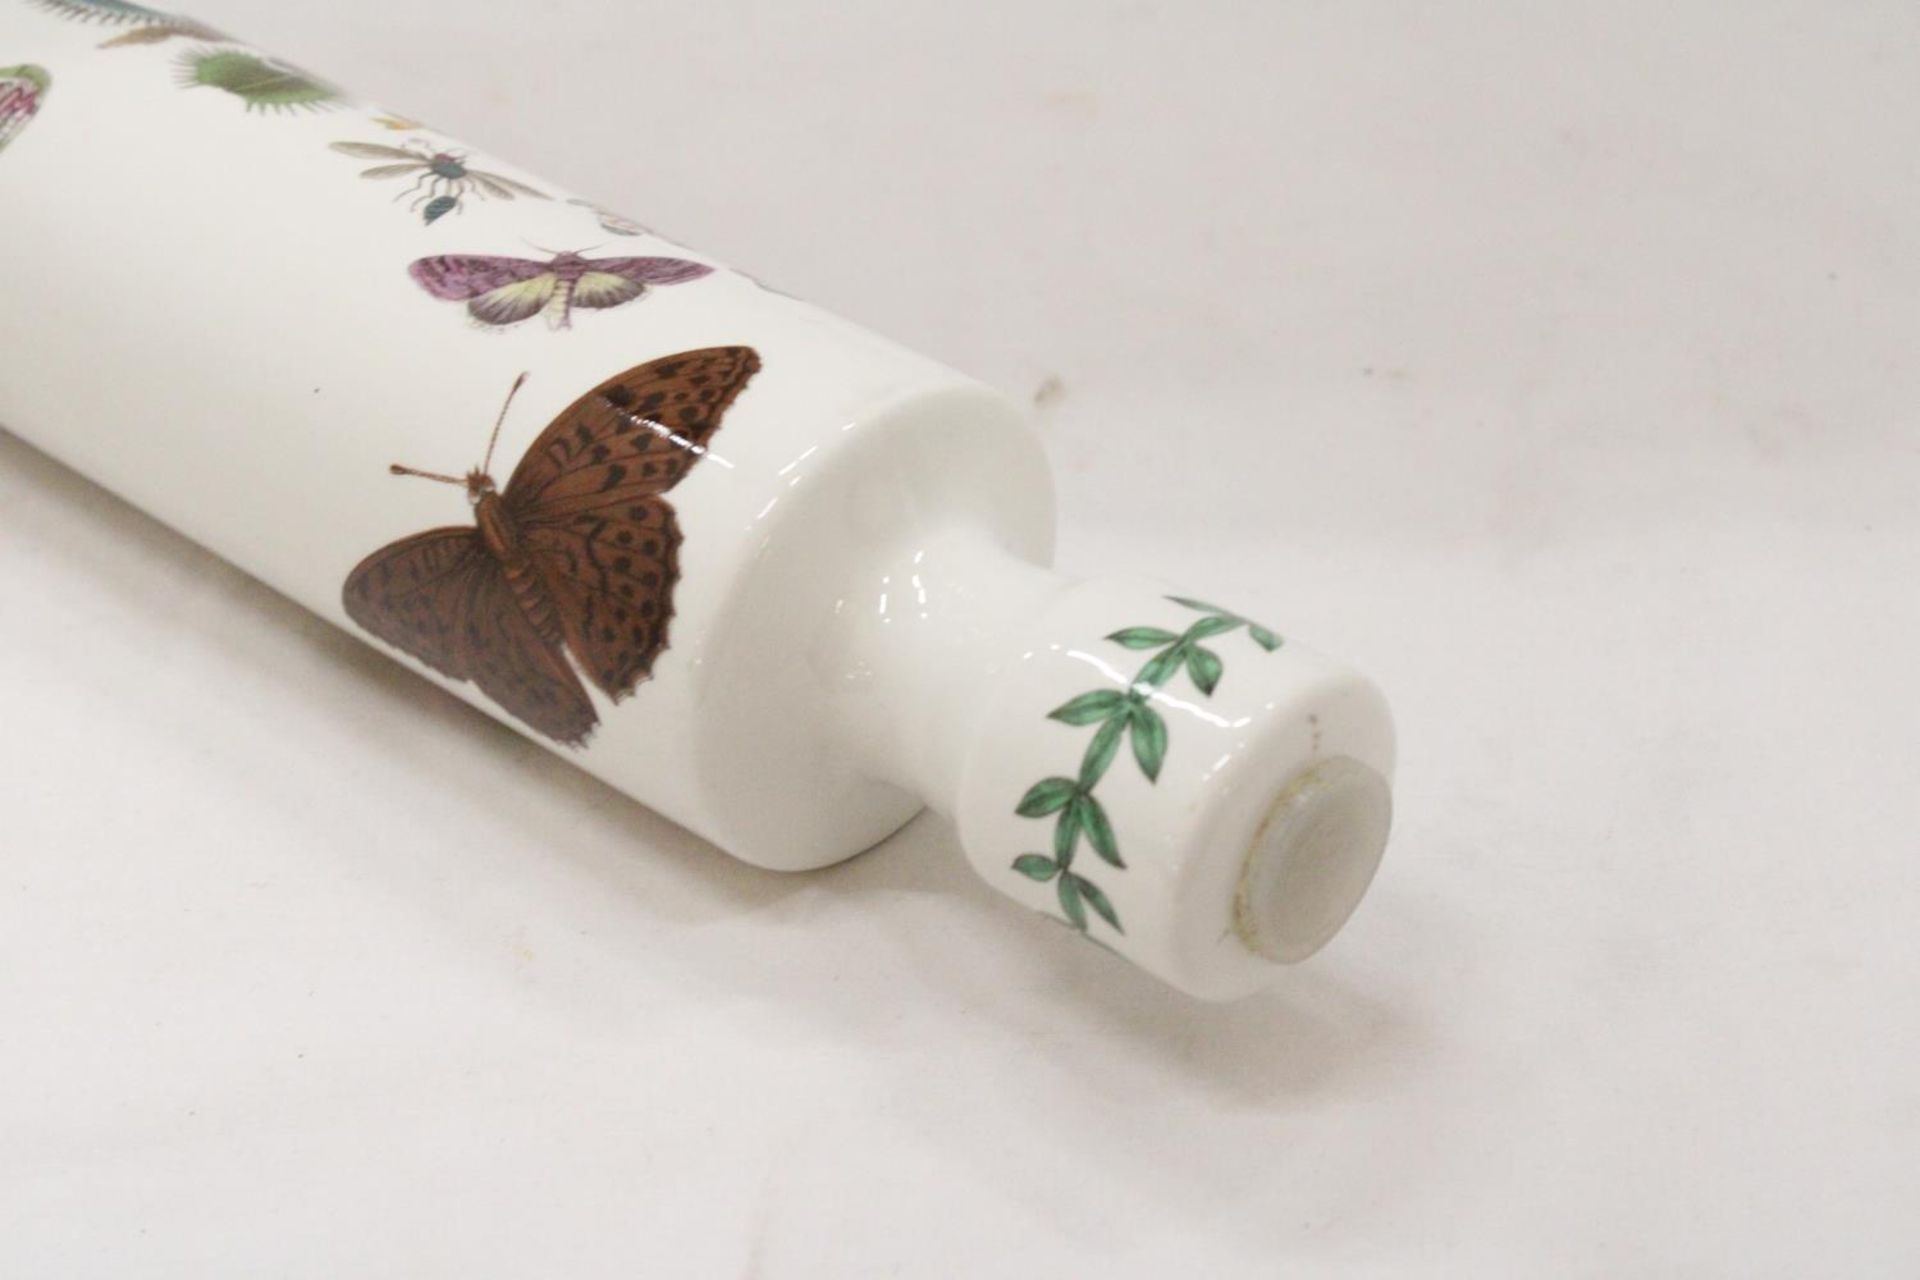 AN AS NEW PORTMERION VENUS FLY TRAP BOTANIC GARDEN ROLLING PIN - Image 3 of 5